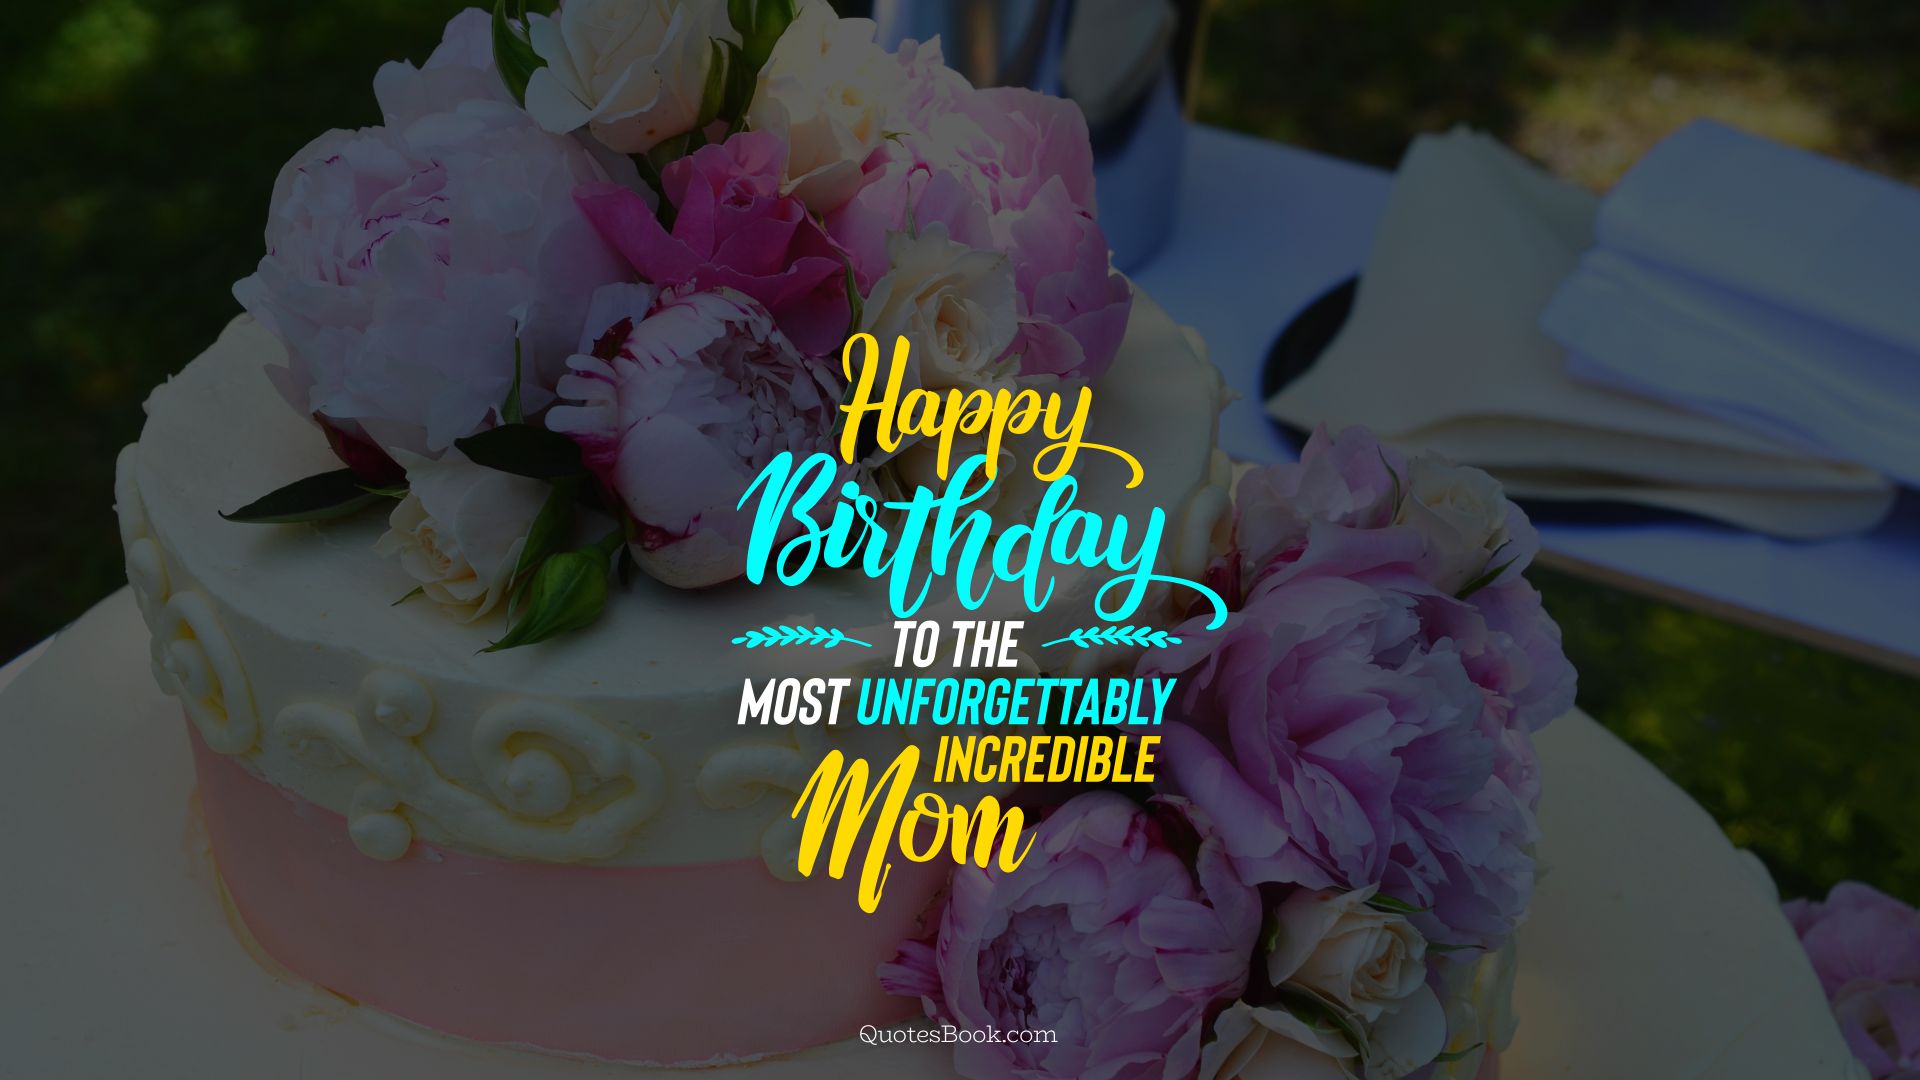 Happy birthday to the most unforgettably incredible Mom!